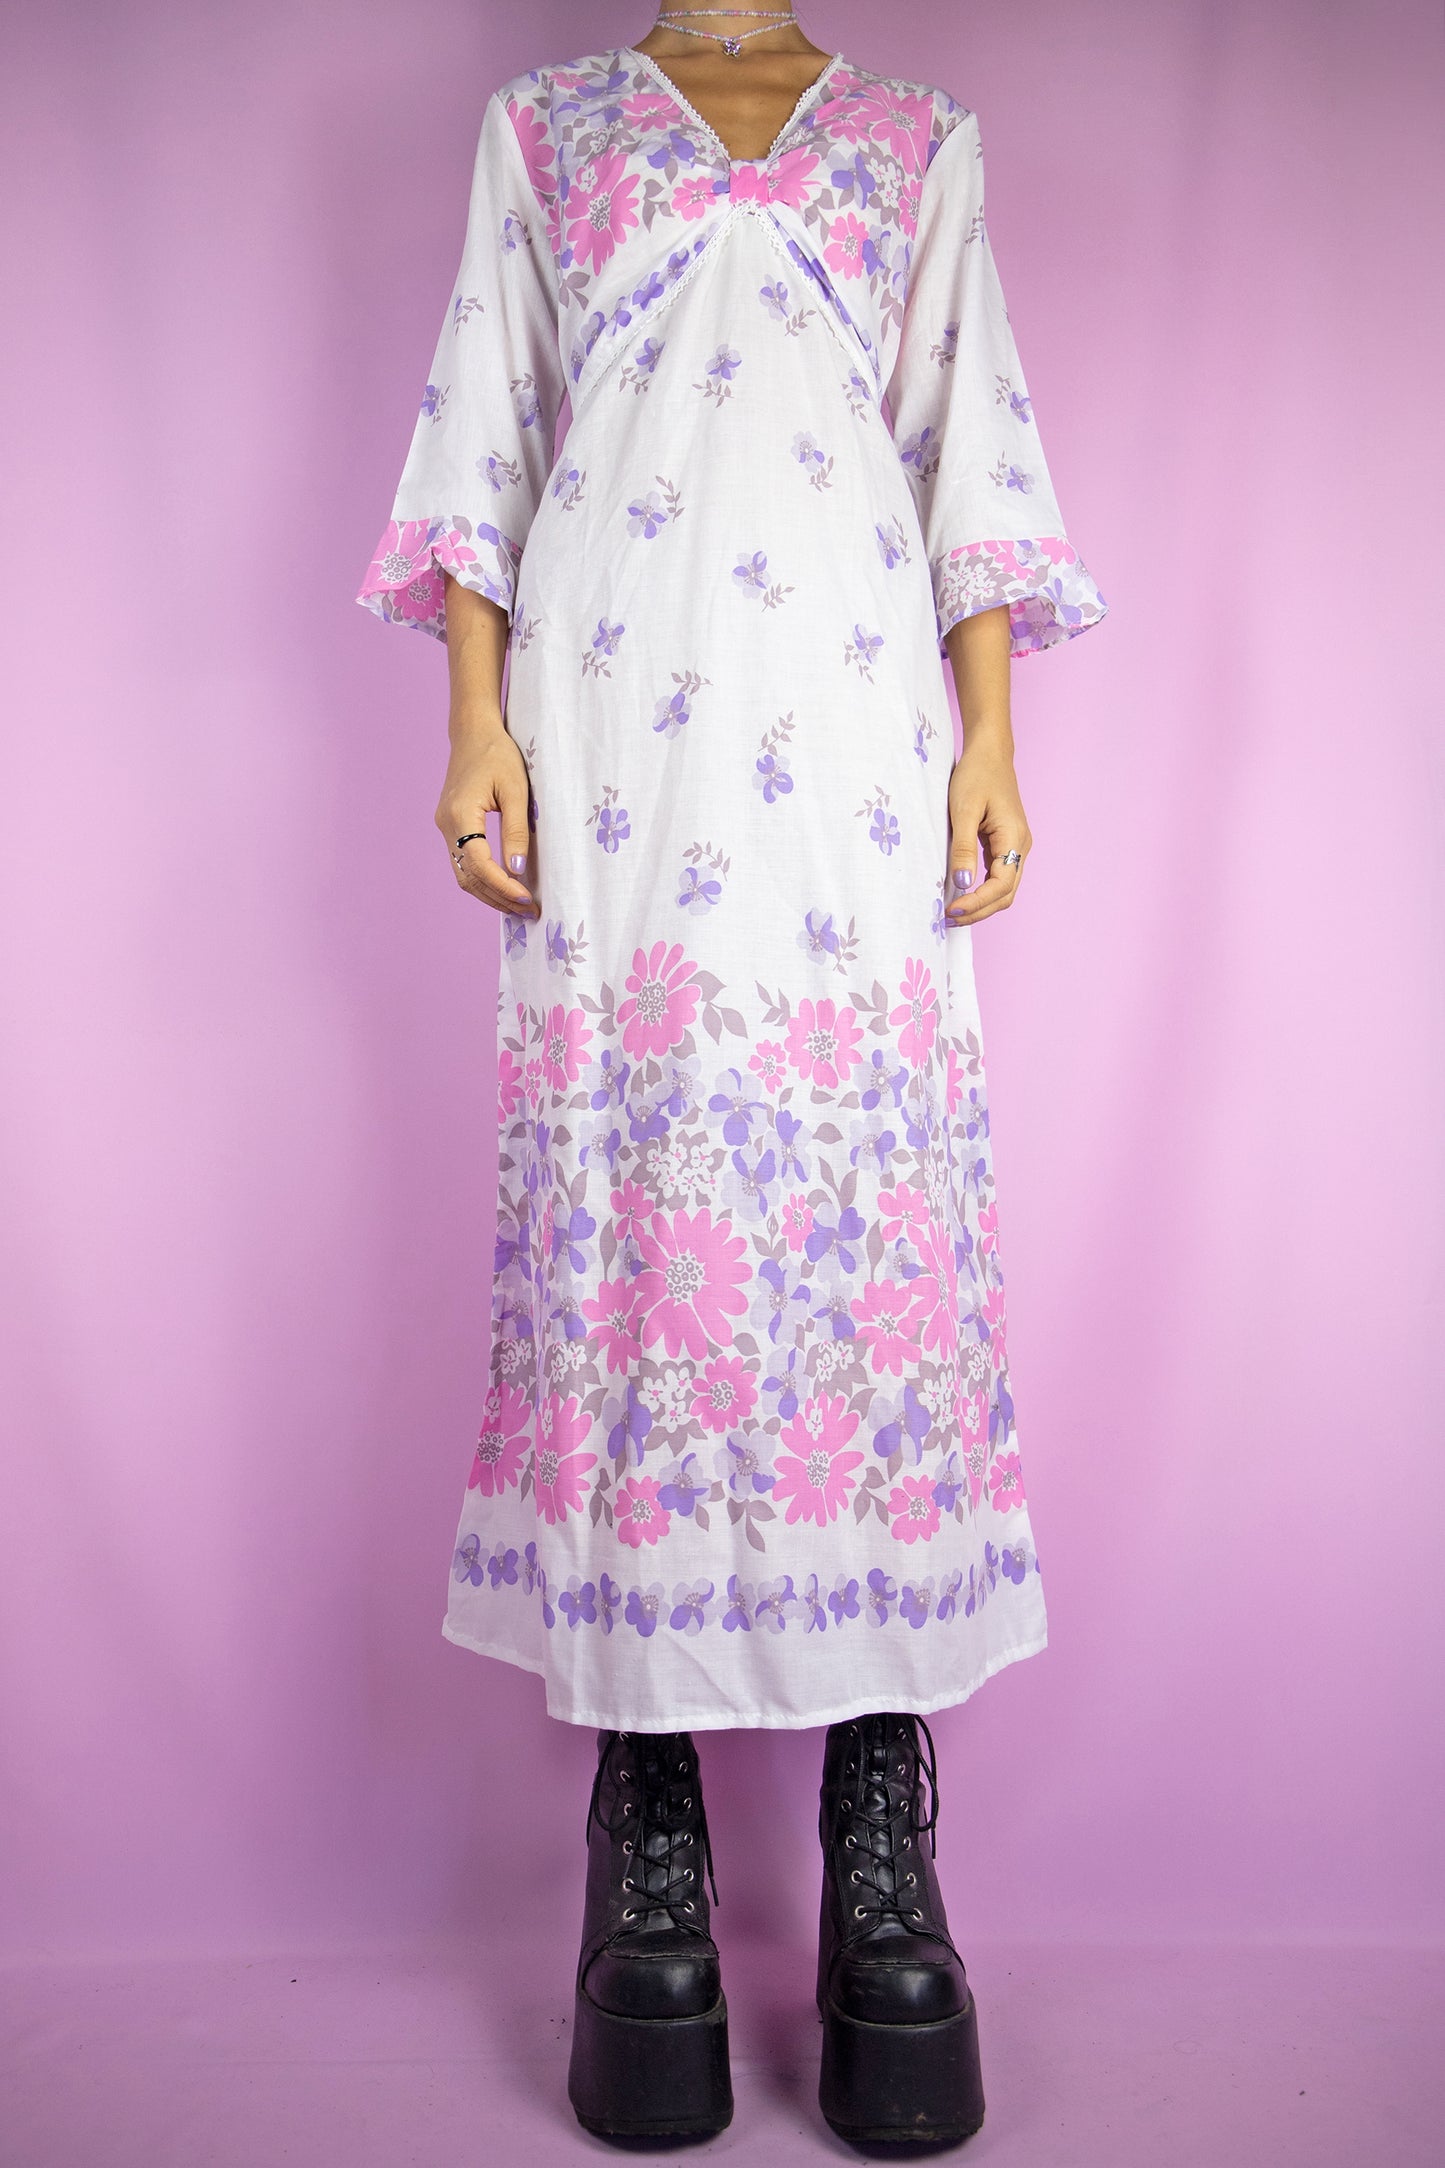 The Vintage 80s Boho White Midi Dress is a white pink and purple floral dress with a v-neck and bell sleeves. Lovely romantic cottage prairie inspired 1980s summer maxi dress.